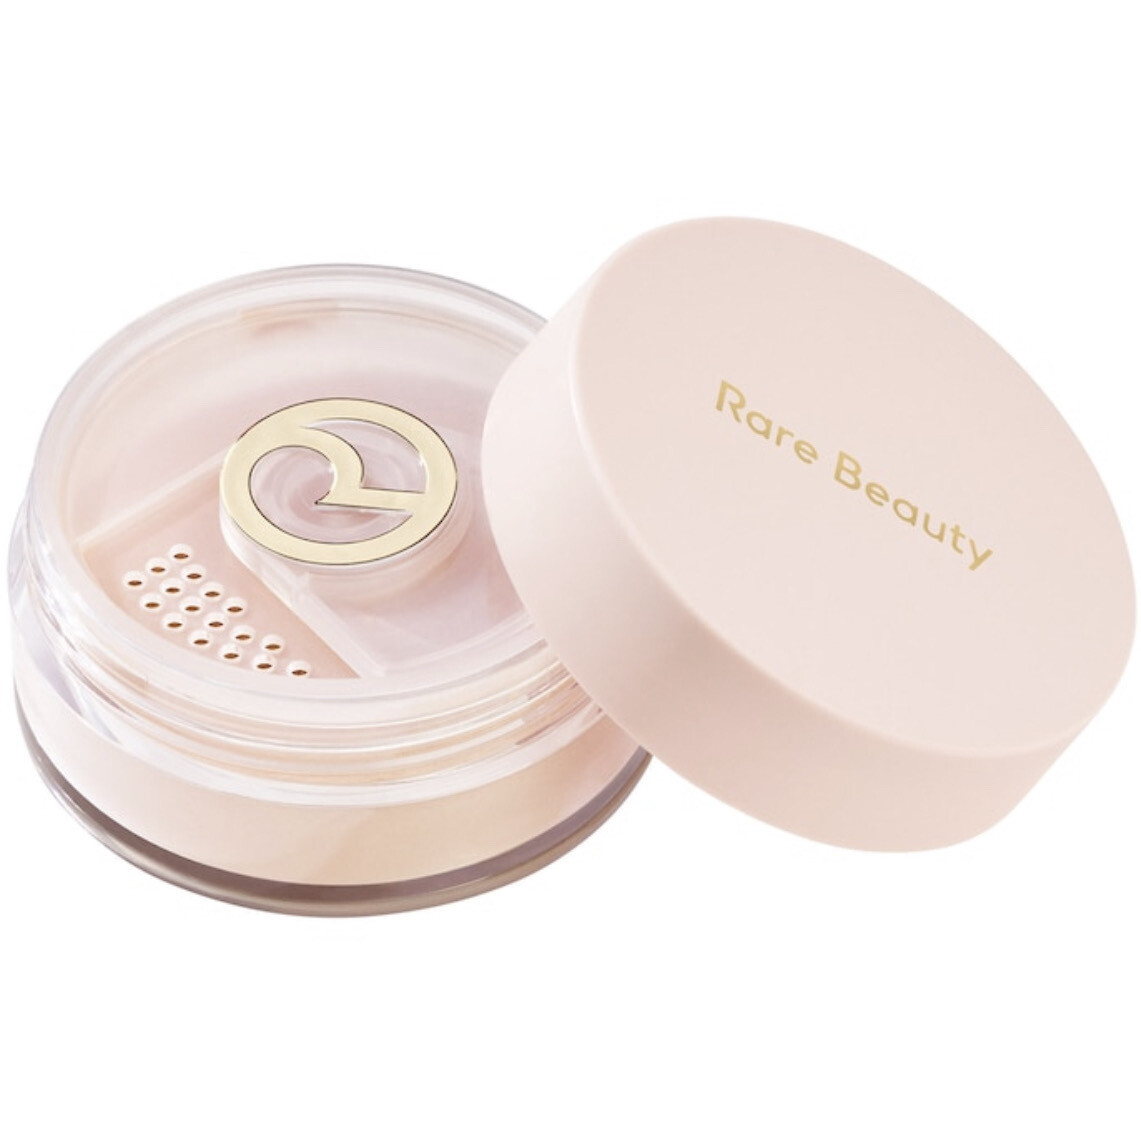 Rare Beauty - Always an Optimist Soft Radiance Setting Powder | Light - soft pink for fair to light complexions